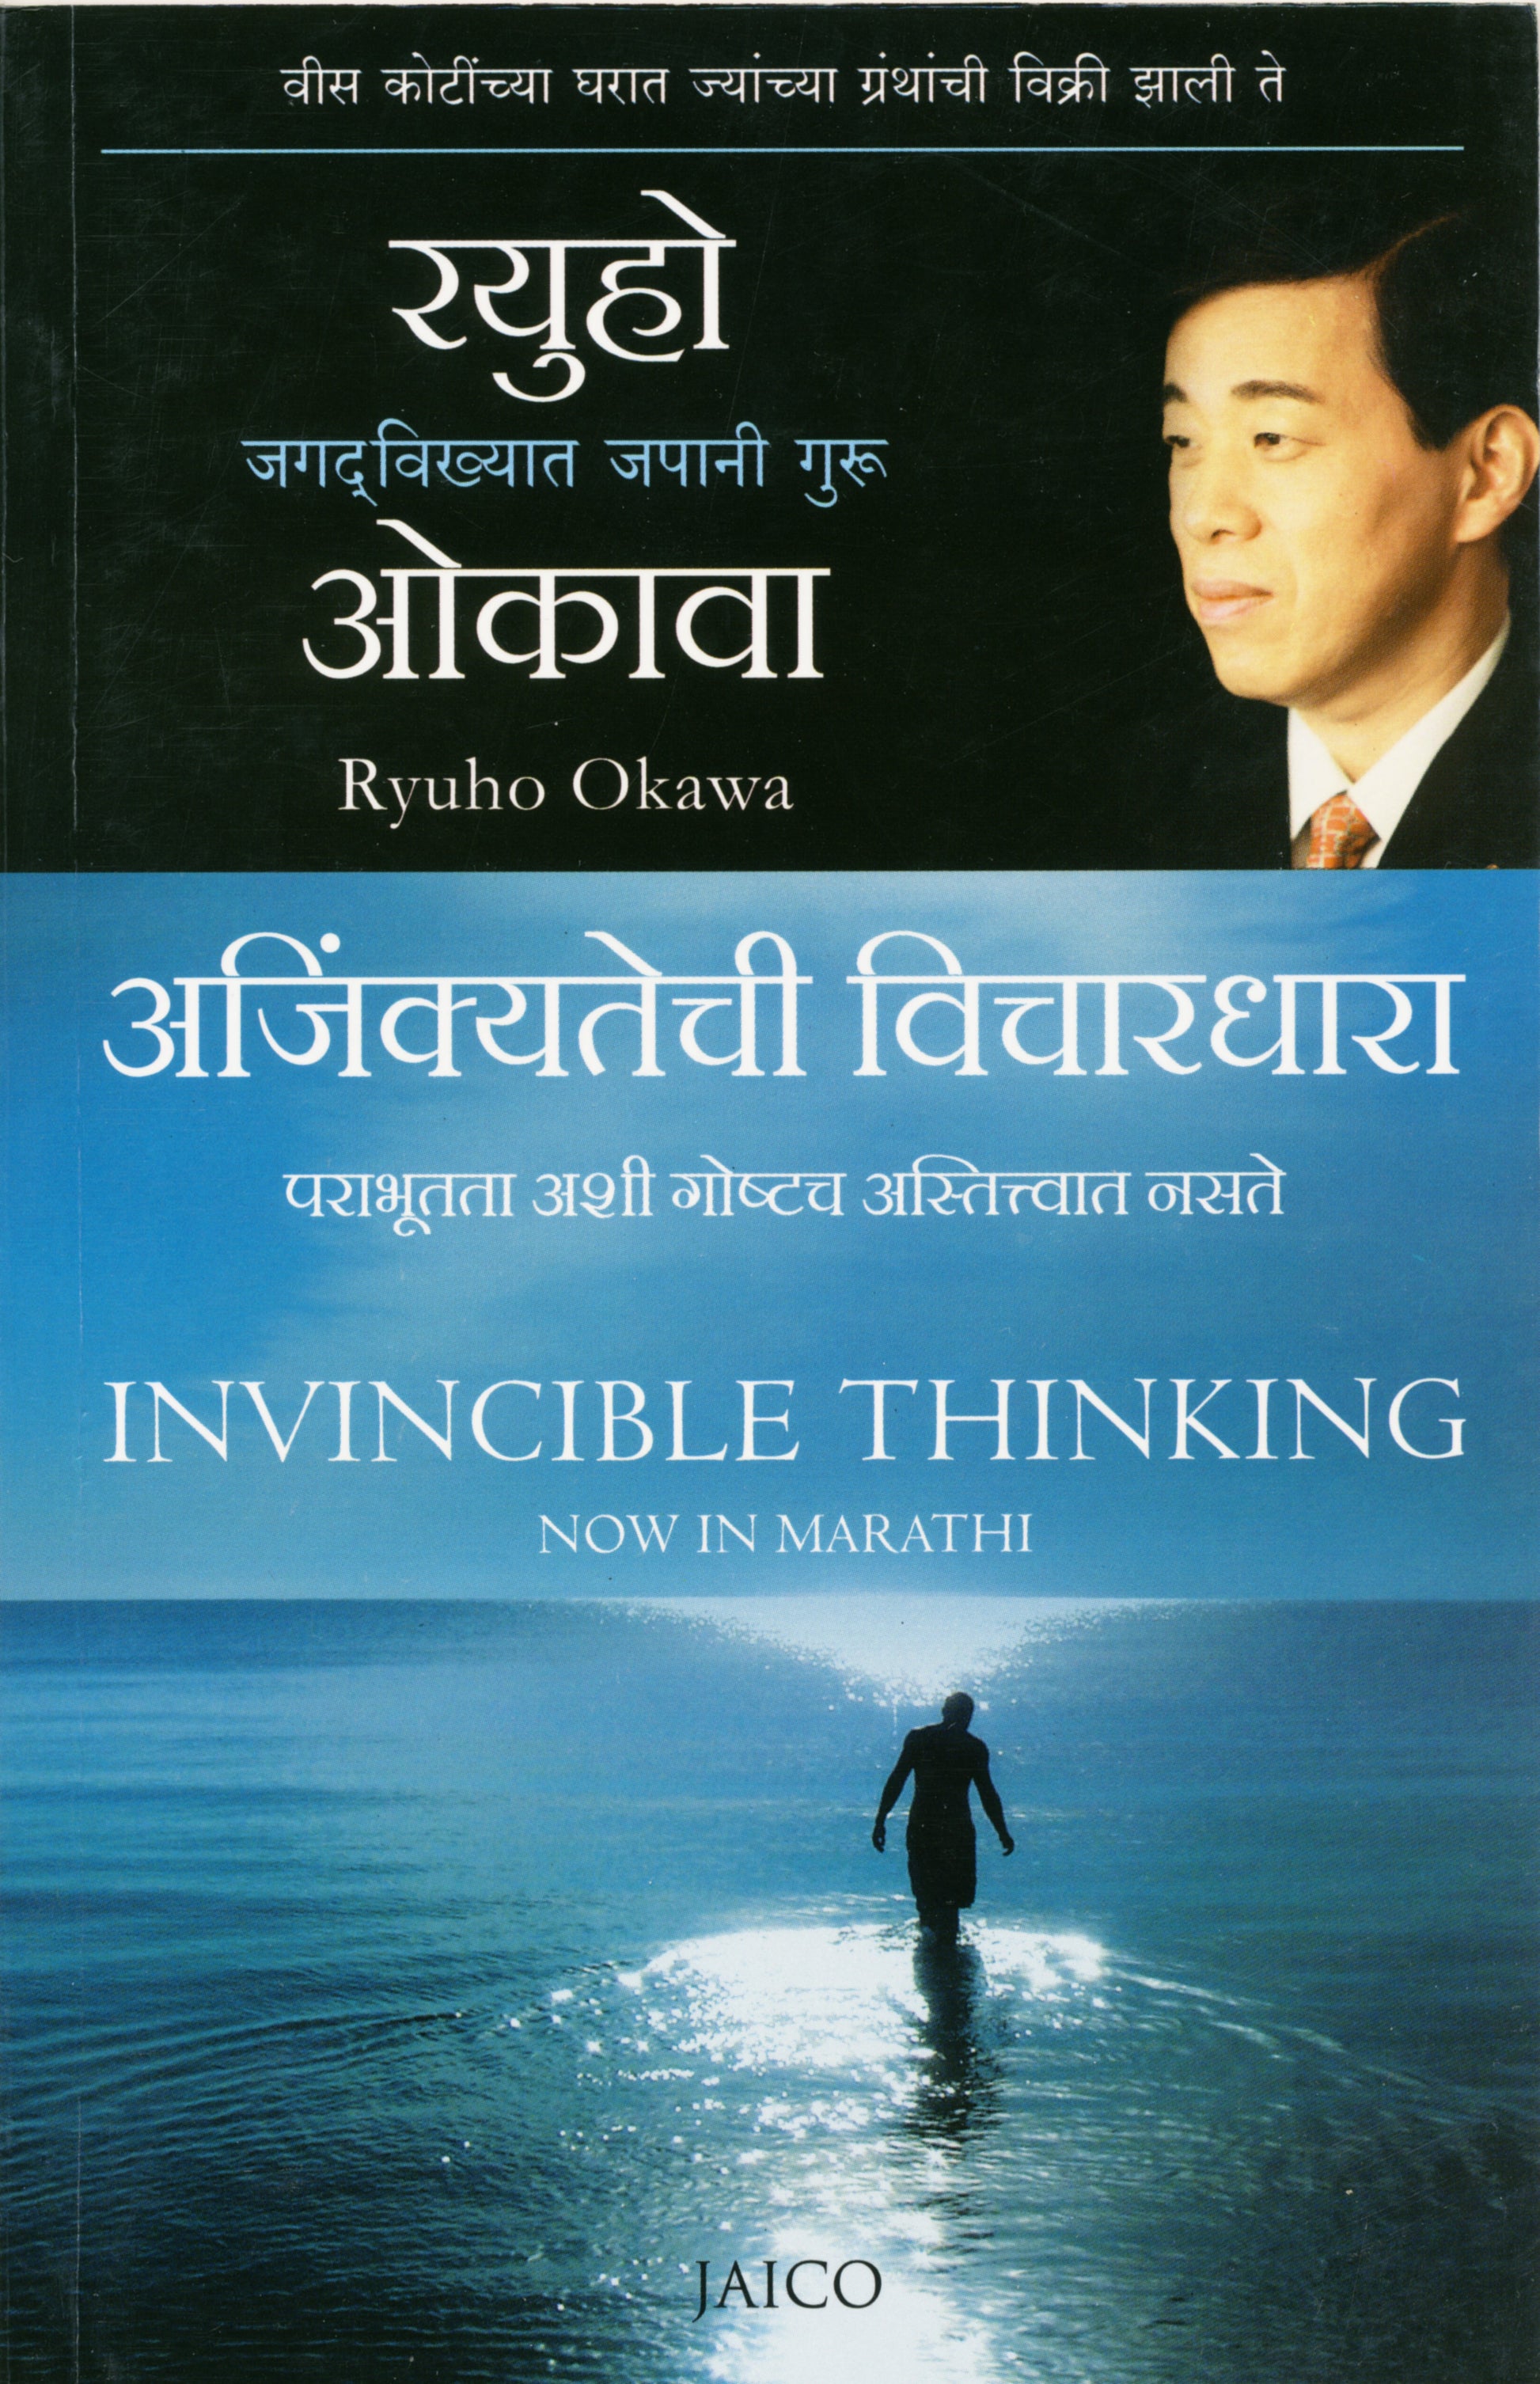 Invincible Thinking : An Essential Guide for a Lifetime of Growth, Success, and Triumph, Ryuho Okawa, Malathi - IRH Press International